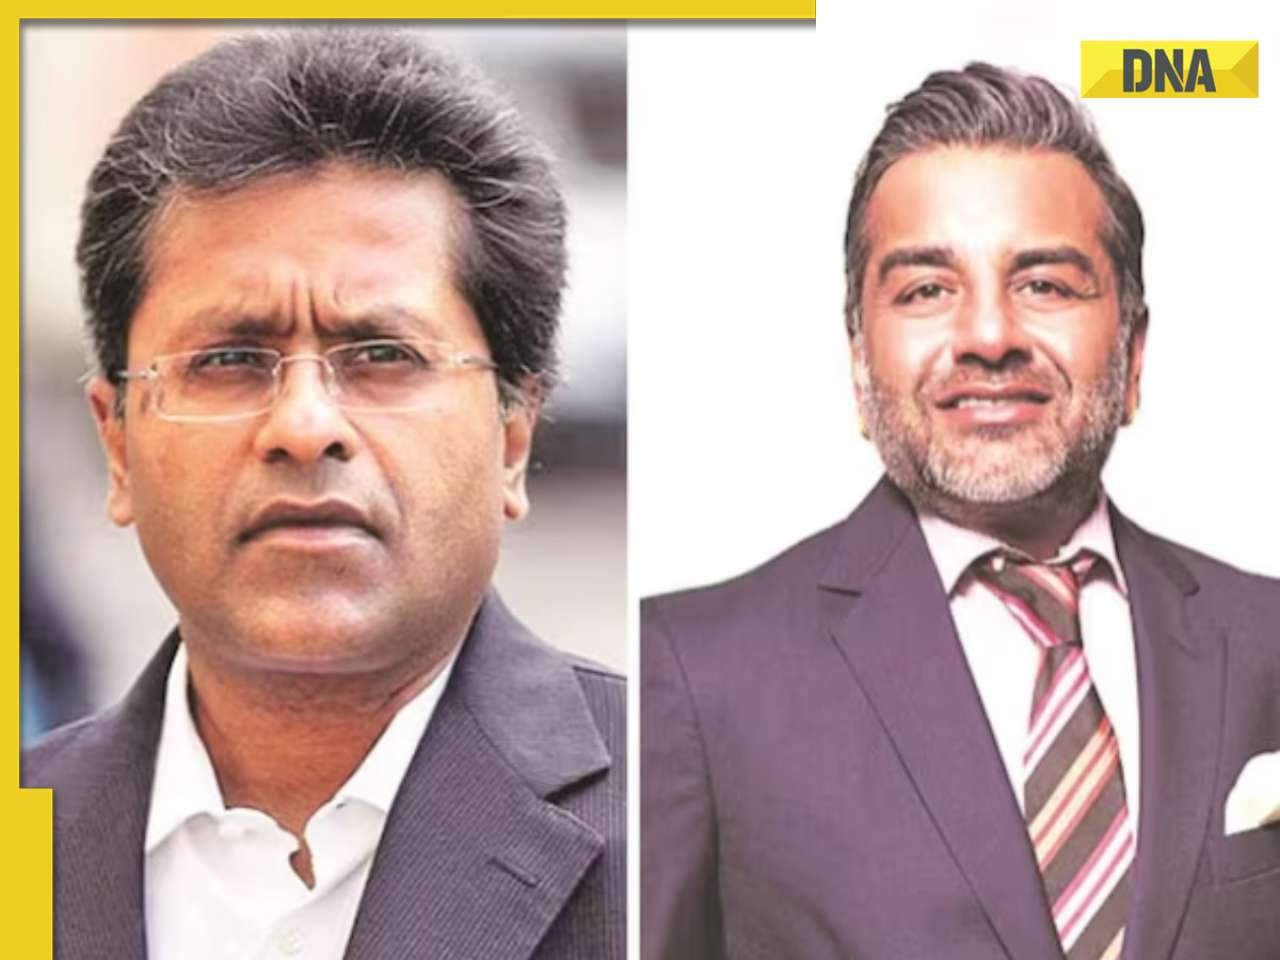 Modi family feud: IPL founder Lalit Modi's brother accuses mother of...